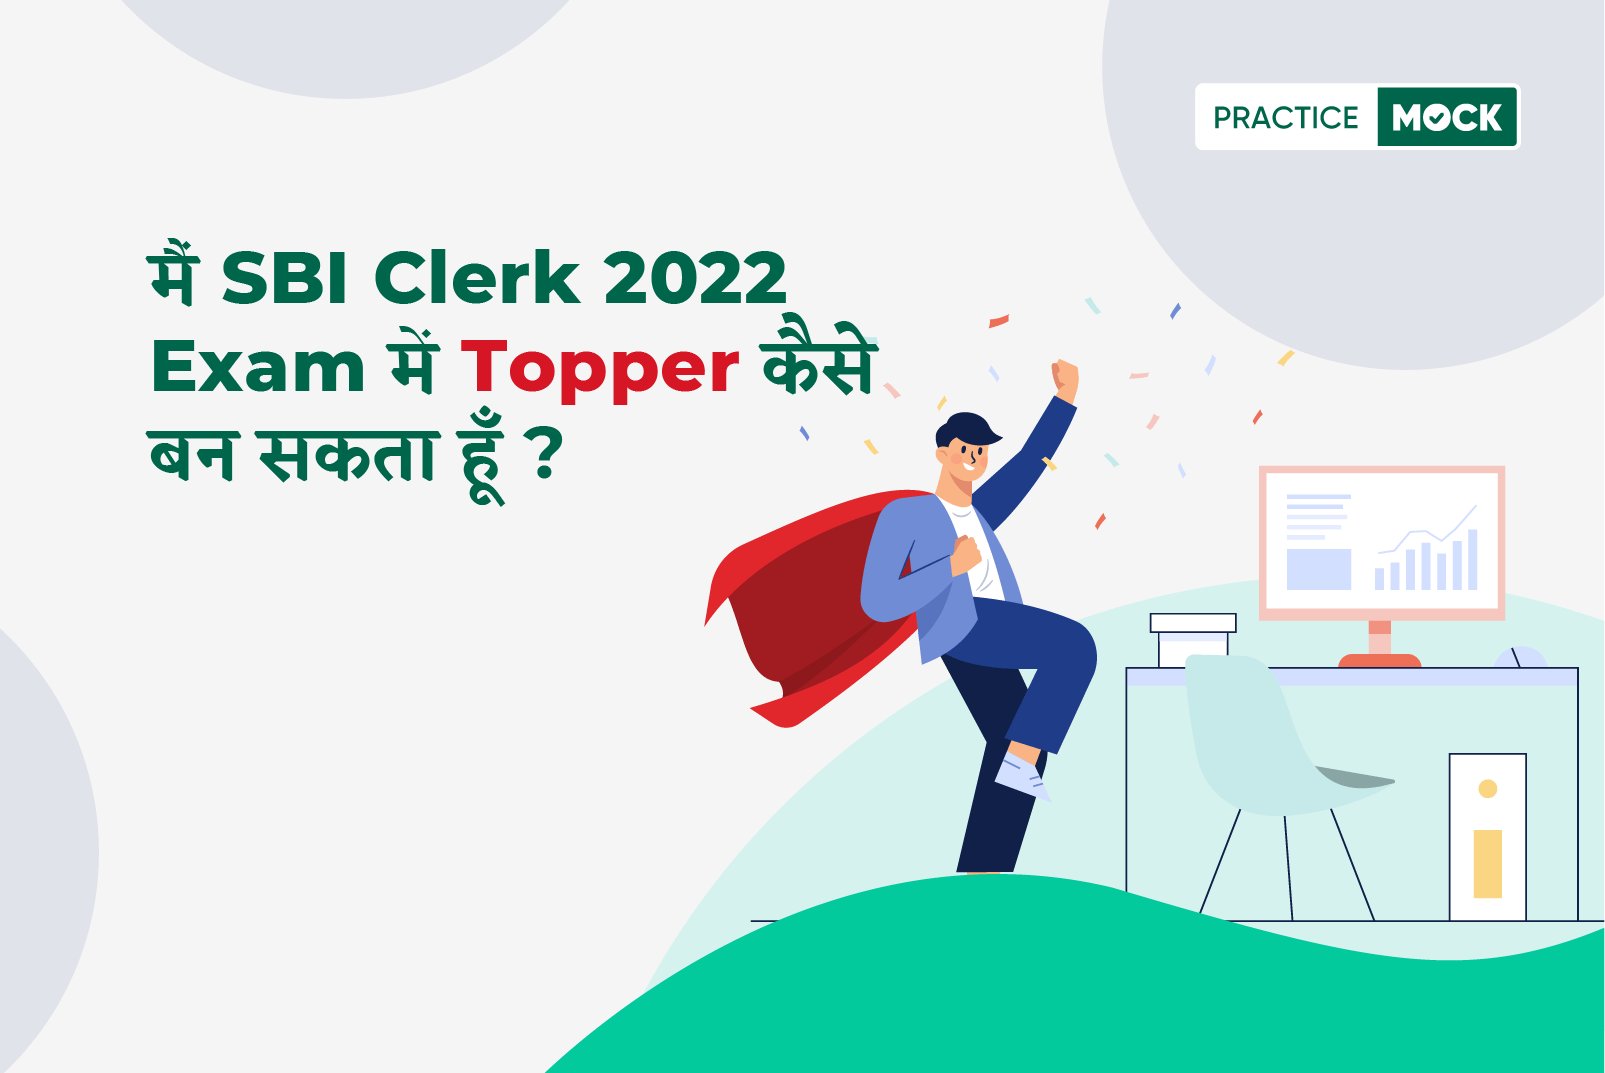 How to clear the SBI Clerk 2022 exam like a Topper?